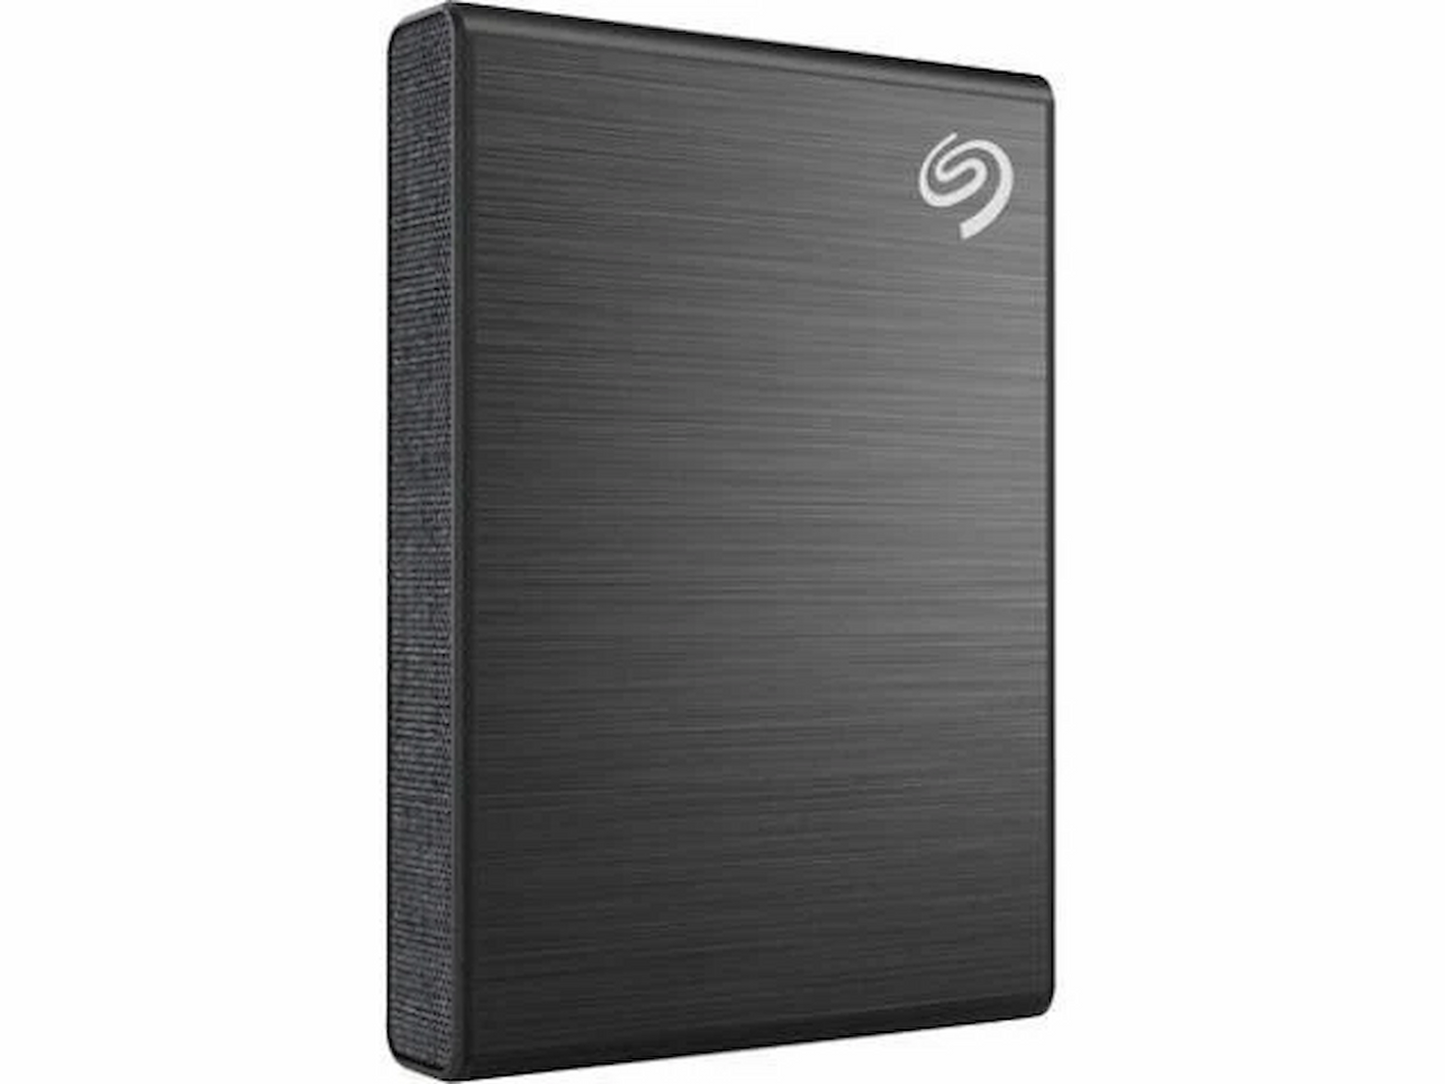 SSD Externo Portátil Seagate One Touch, 2TB, USB C, Negro